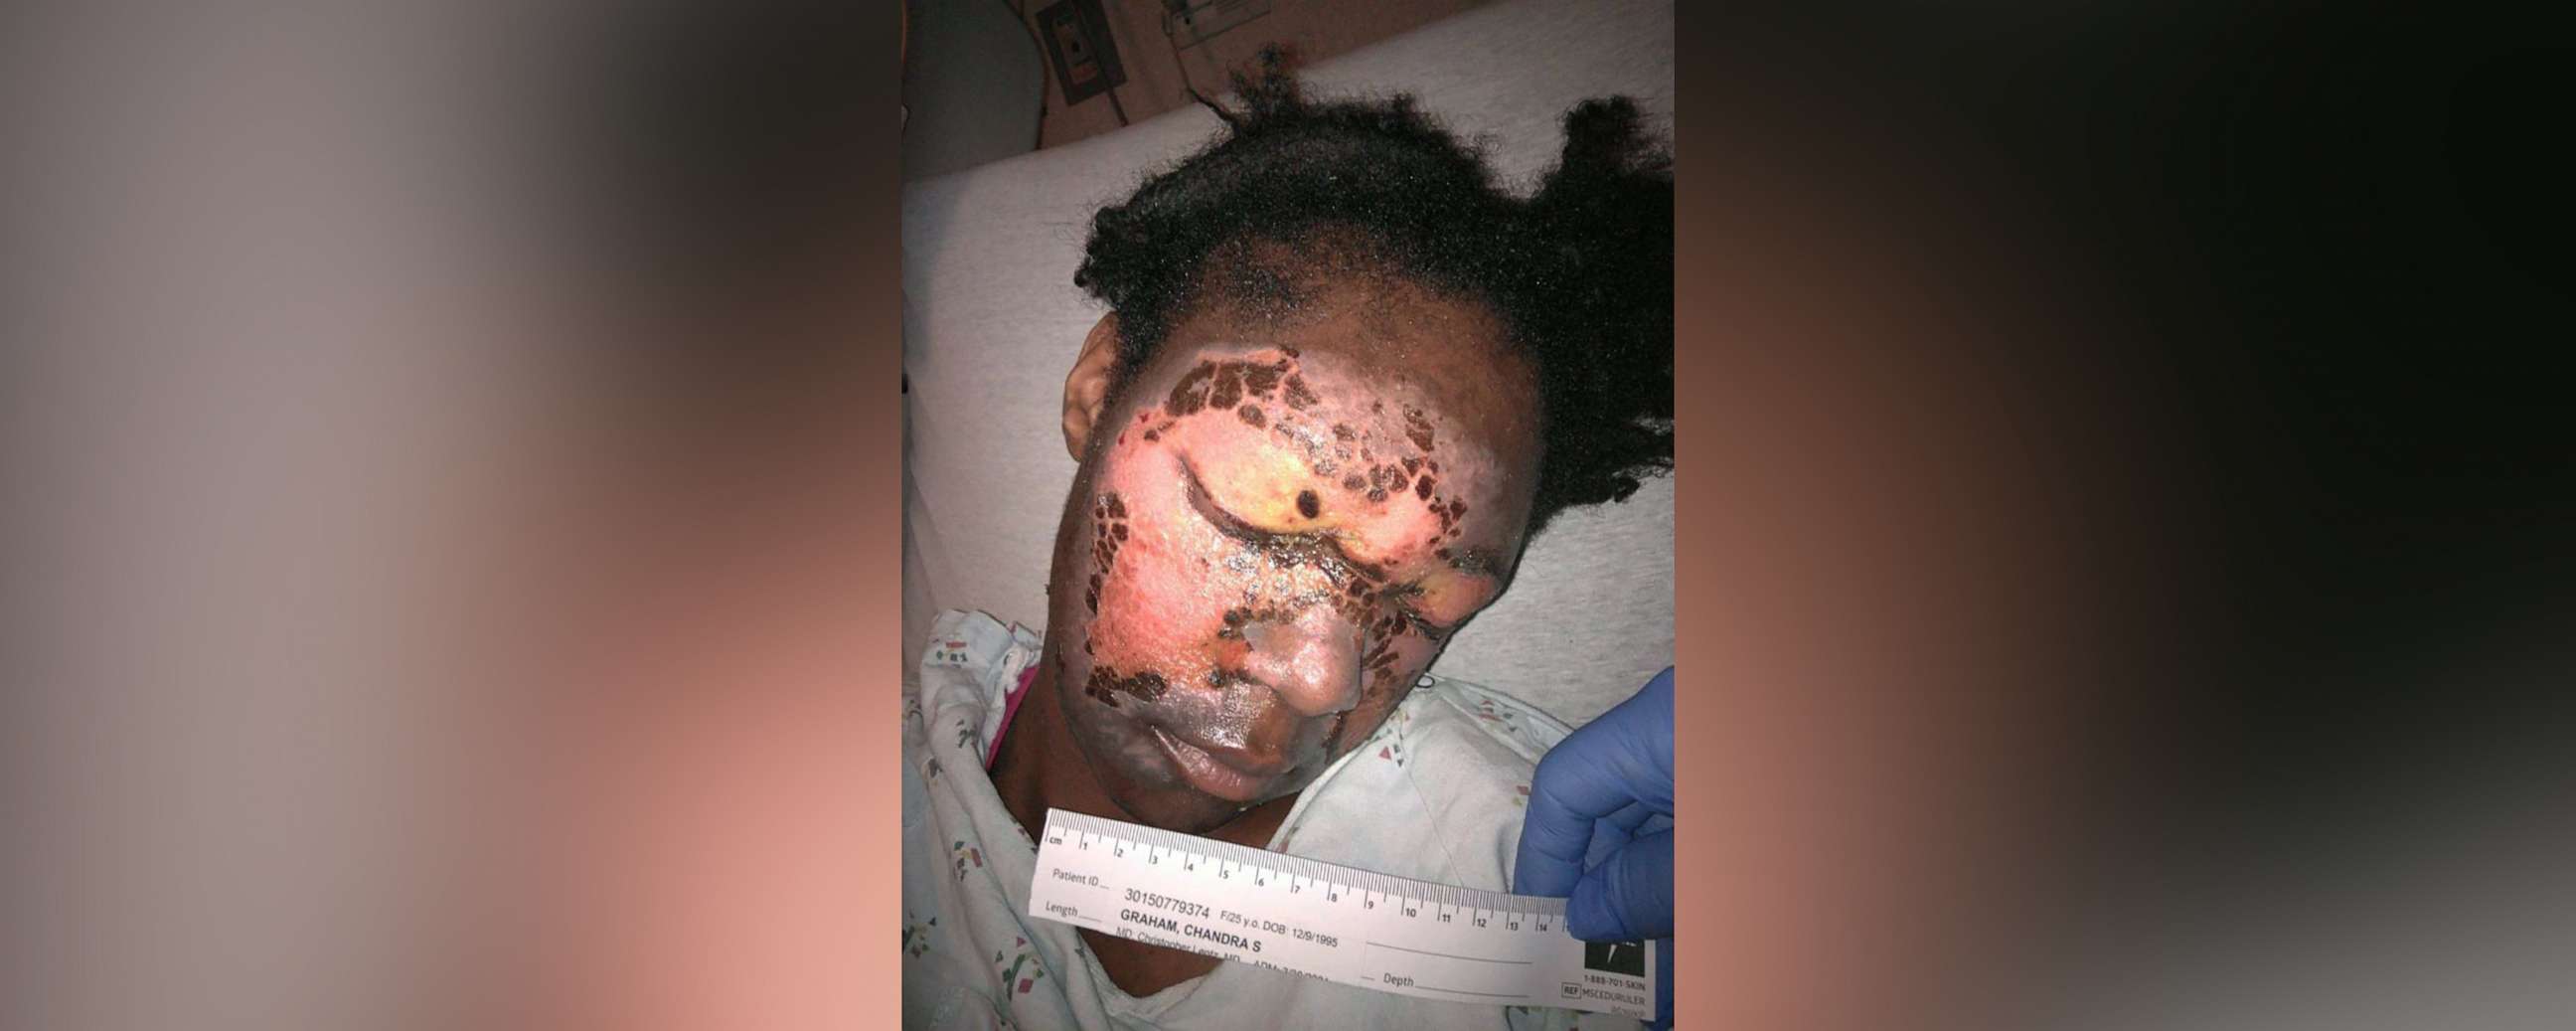 PHOTO: Chandra Graham alleges she suffered burns on her face at her former jail after a liquid mixed with urine and feces splashed onto her face.